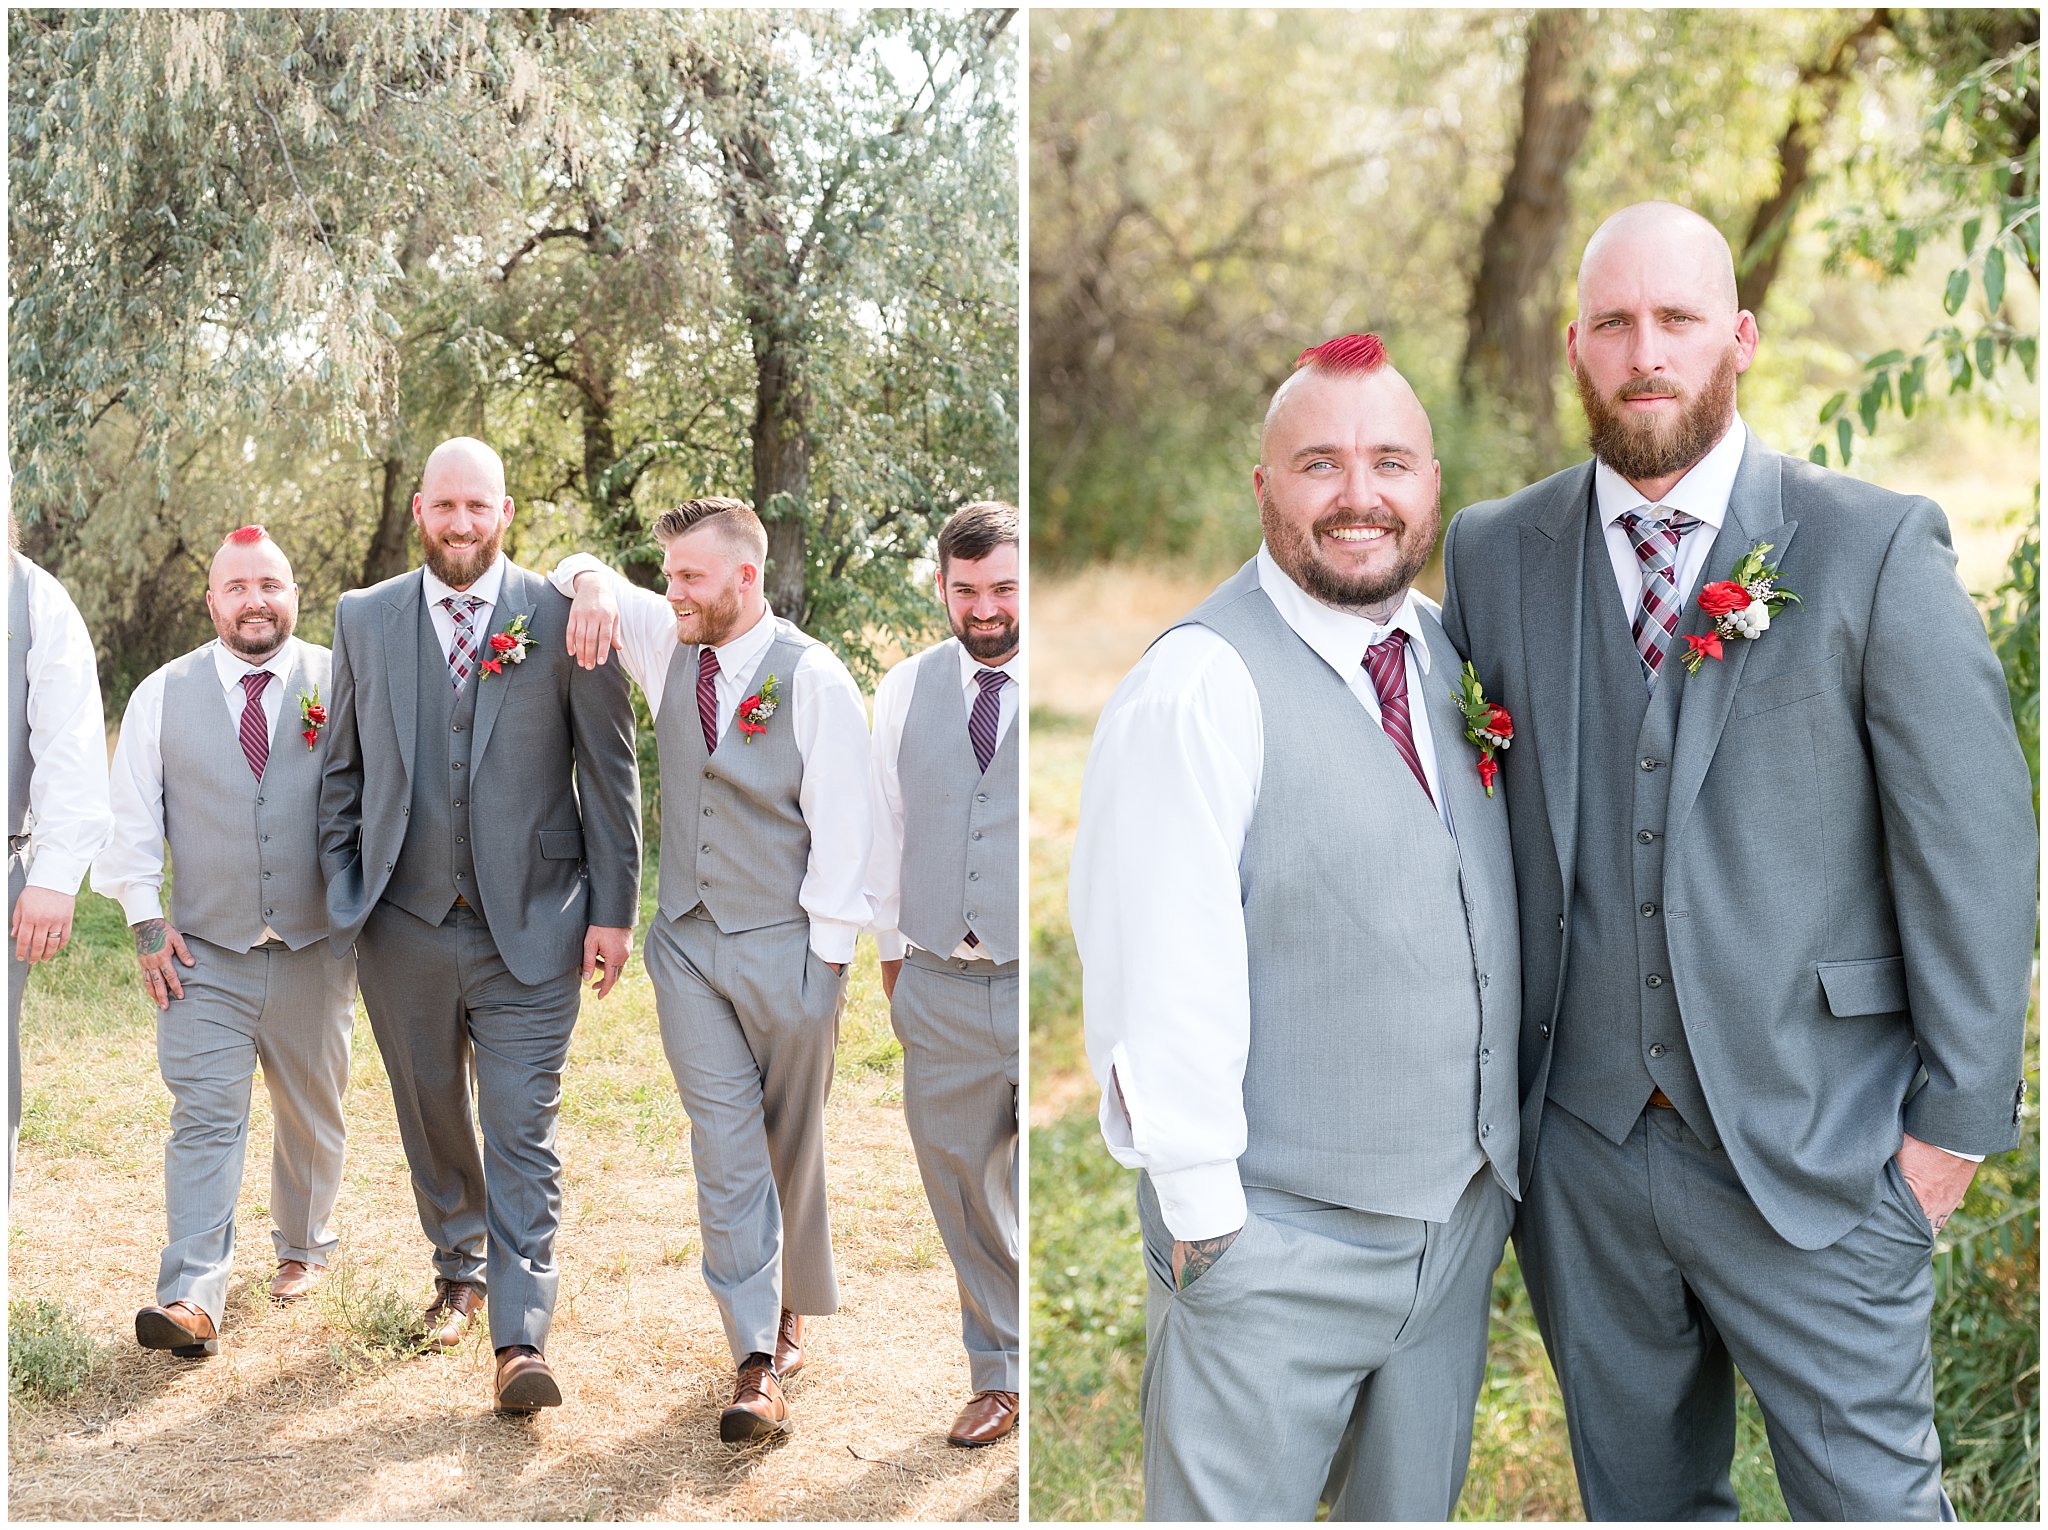 Groom and groomsmen in grey suits laughing and walking | Davis County Outdoor Wedding | Jessie and Dallin Photography